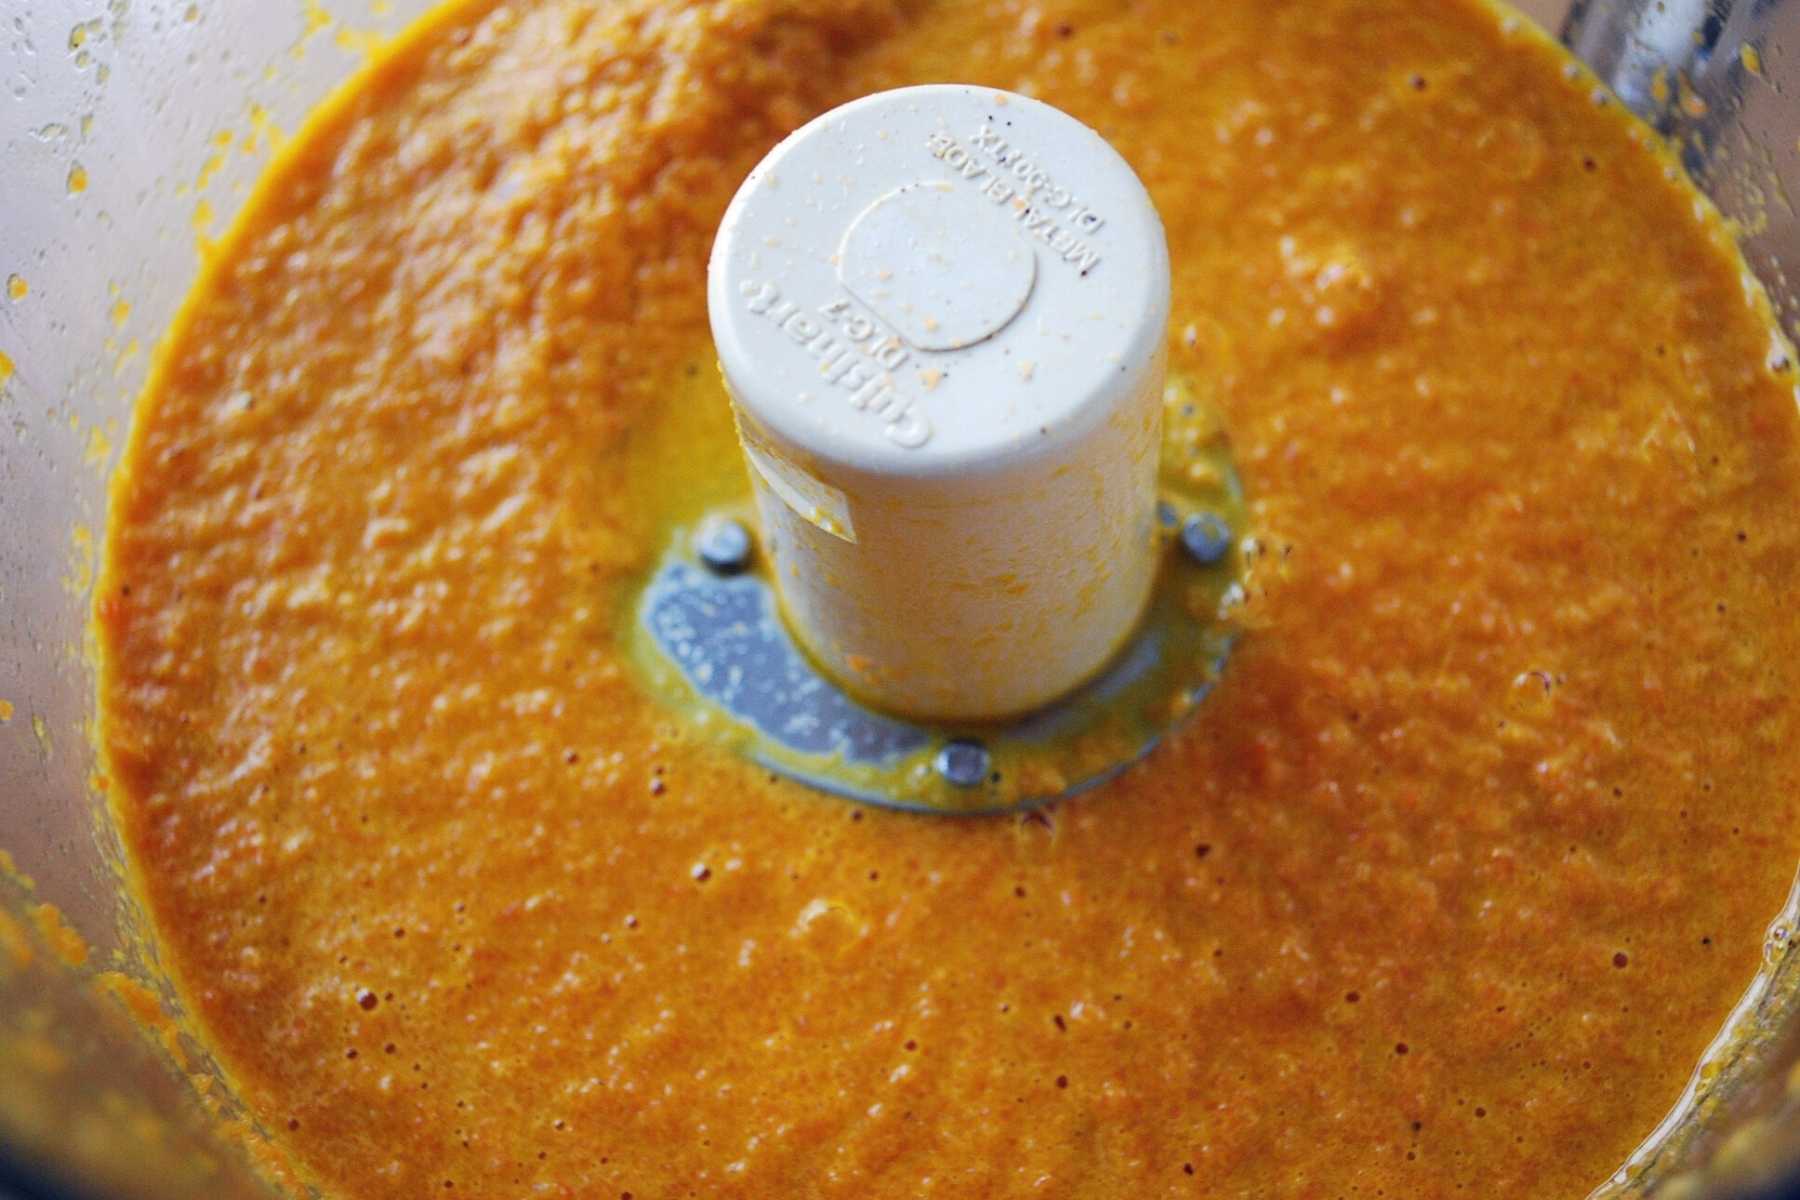 Carrot ginger sauce blended in a food processor